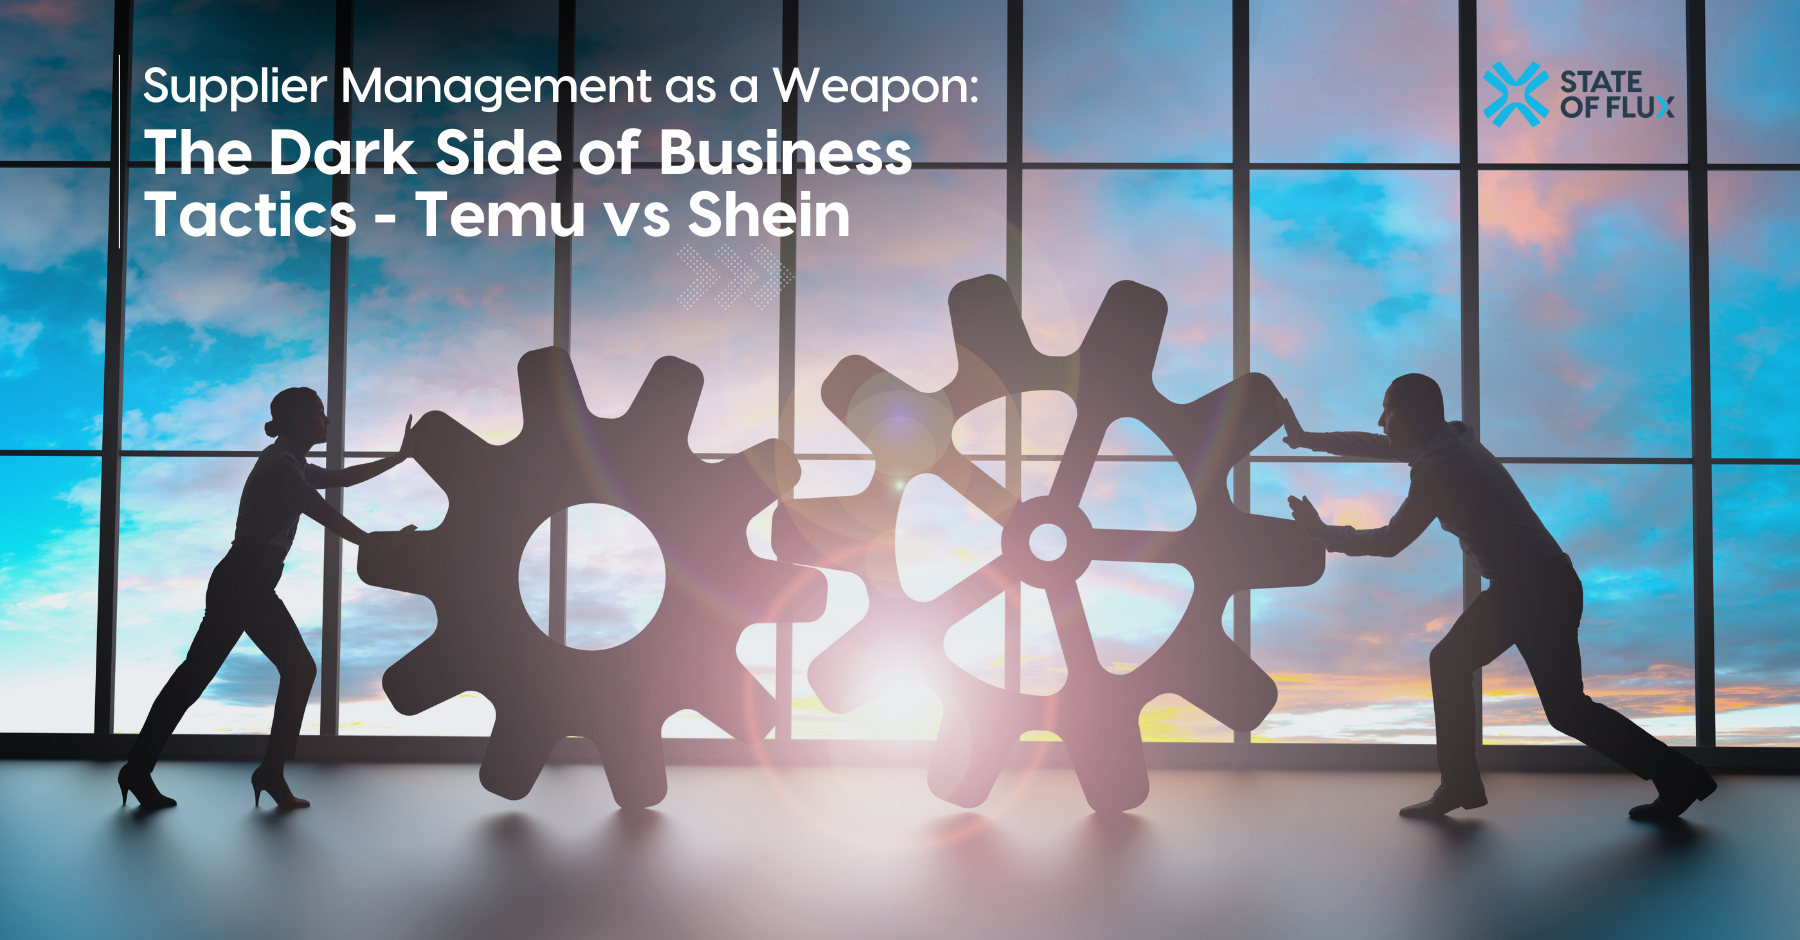 Supplier Management as a Weapon: The Dark Side of Business Tactics - Temu vs Shein